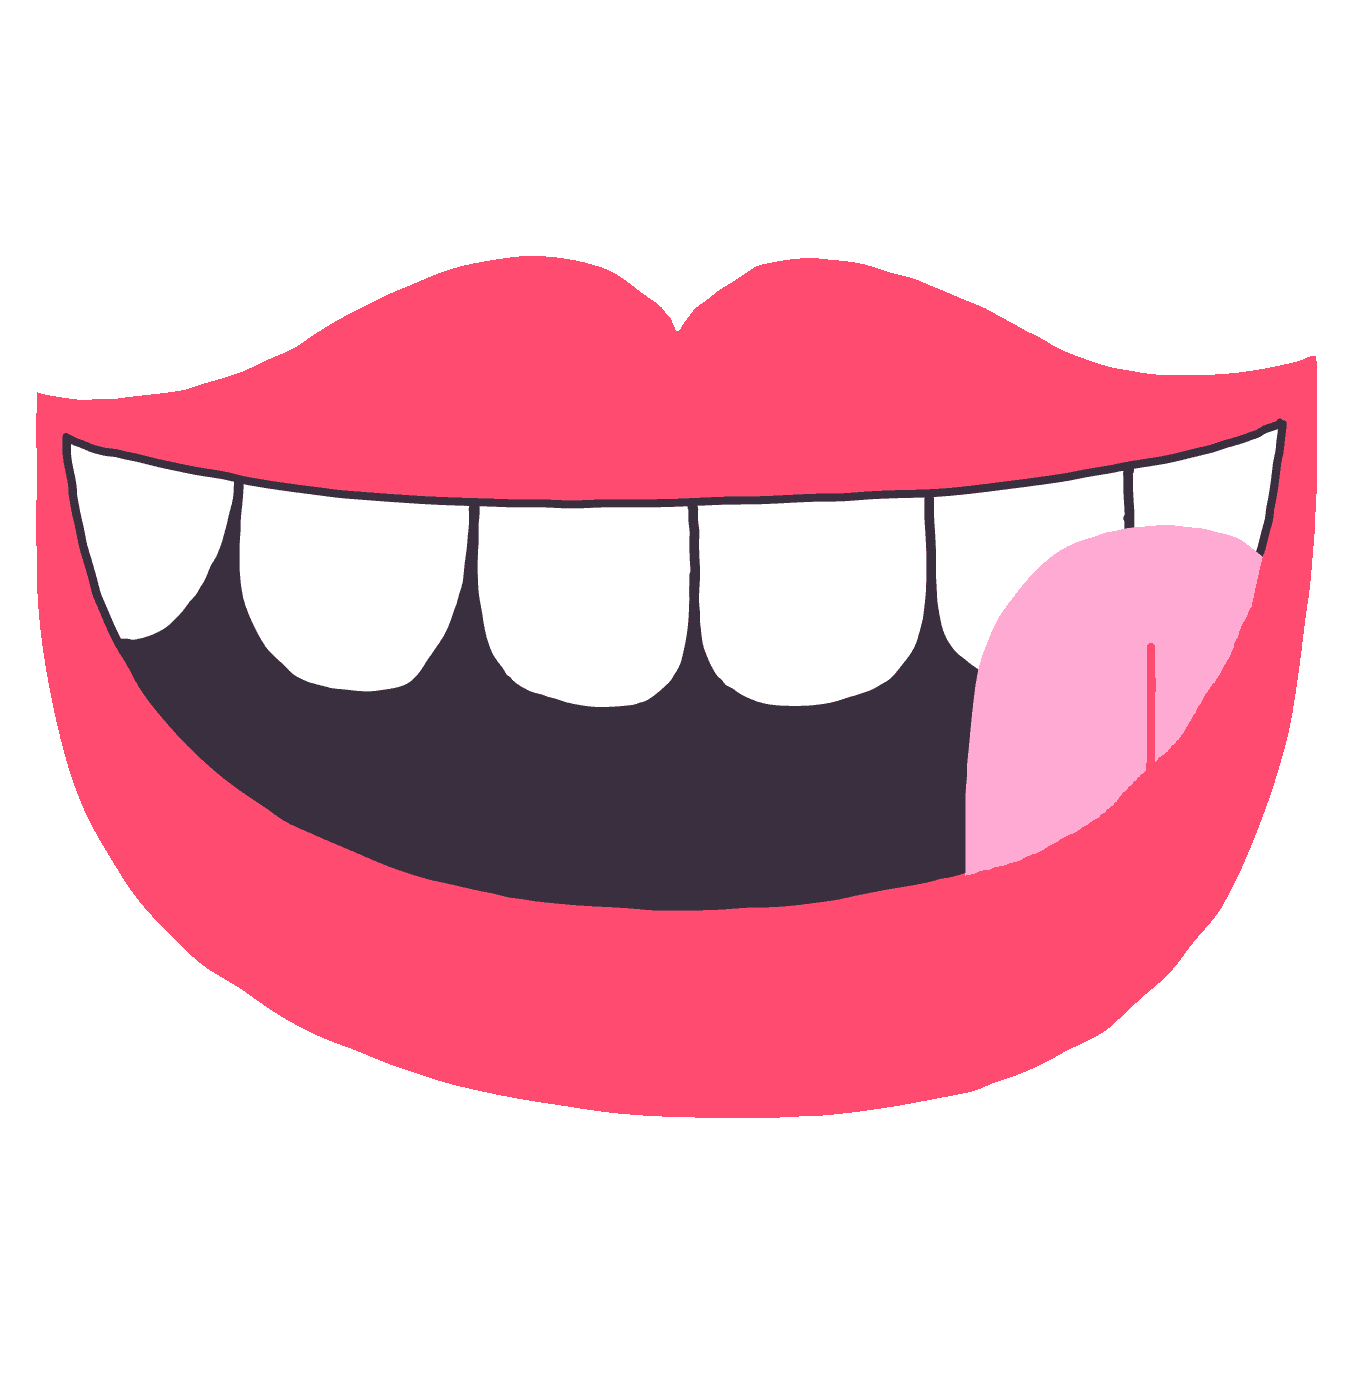 Lips Tongue Sticker by Tim Lahan for iOS & Android | GIPHY